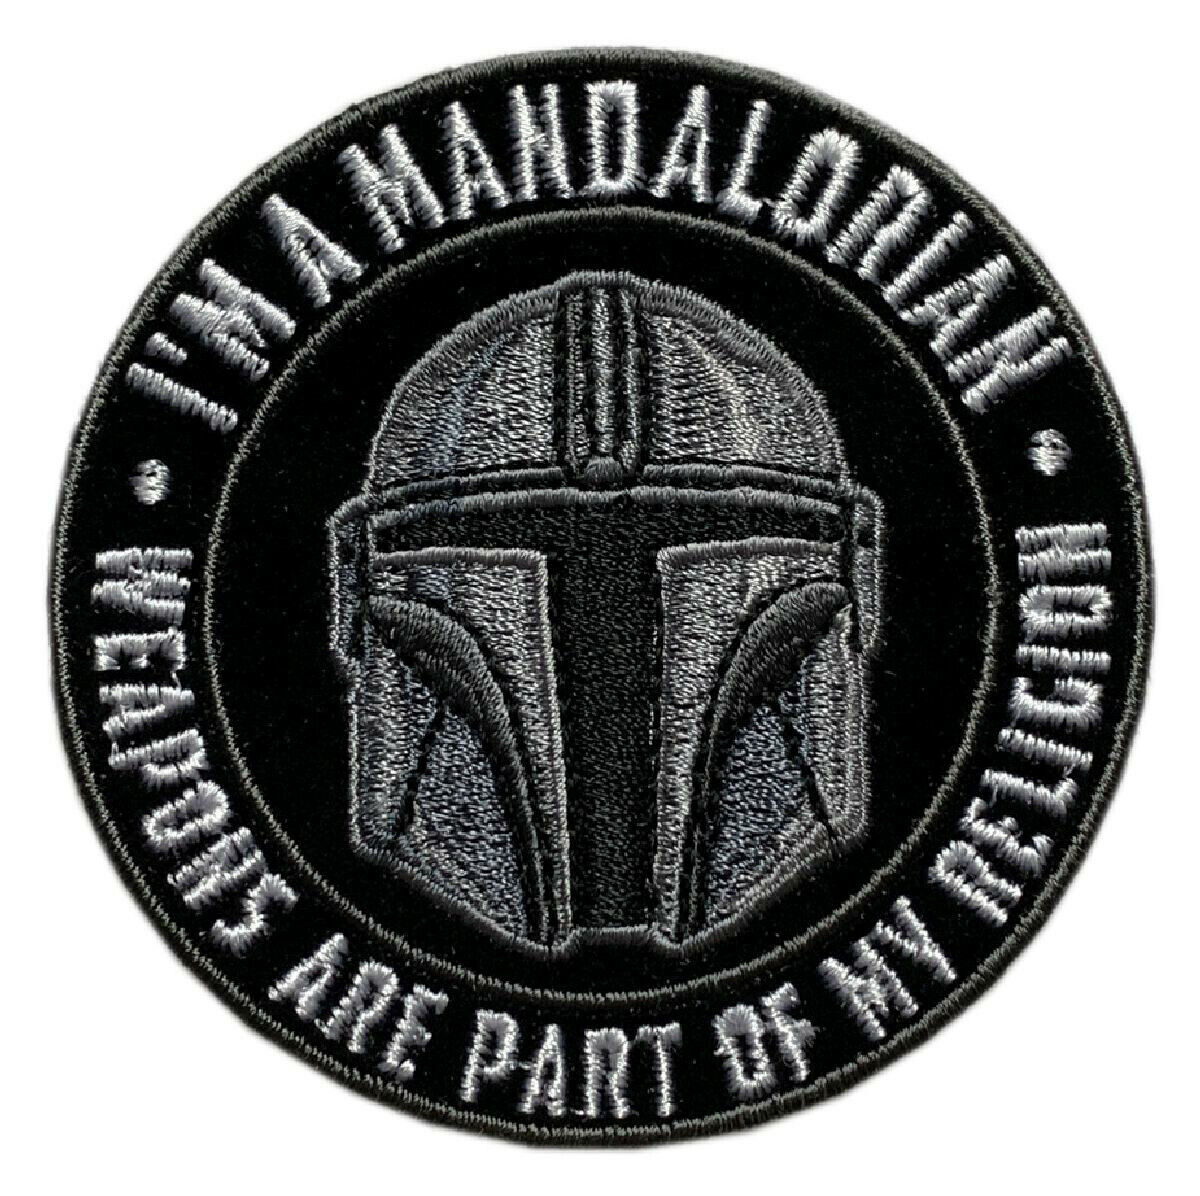 Mandalorian Weapons are A Part of My Religion Patch [Hook Fastener- W4]